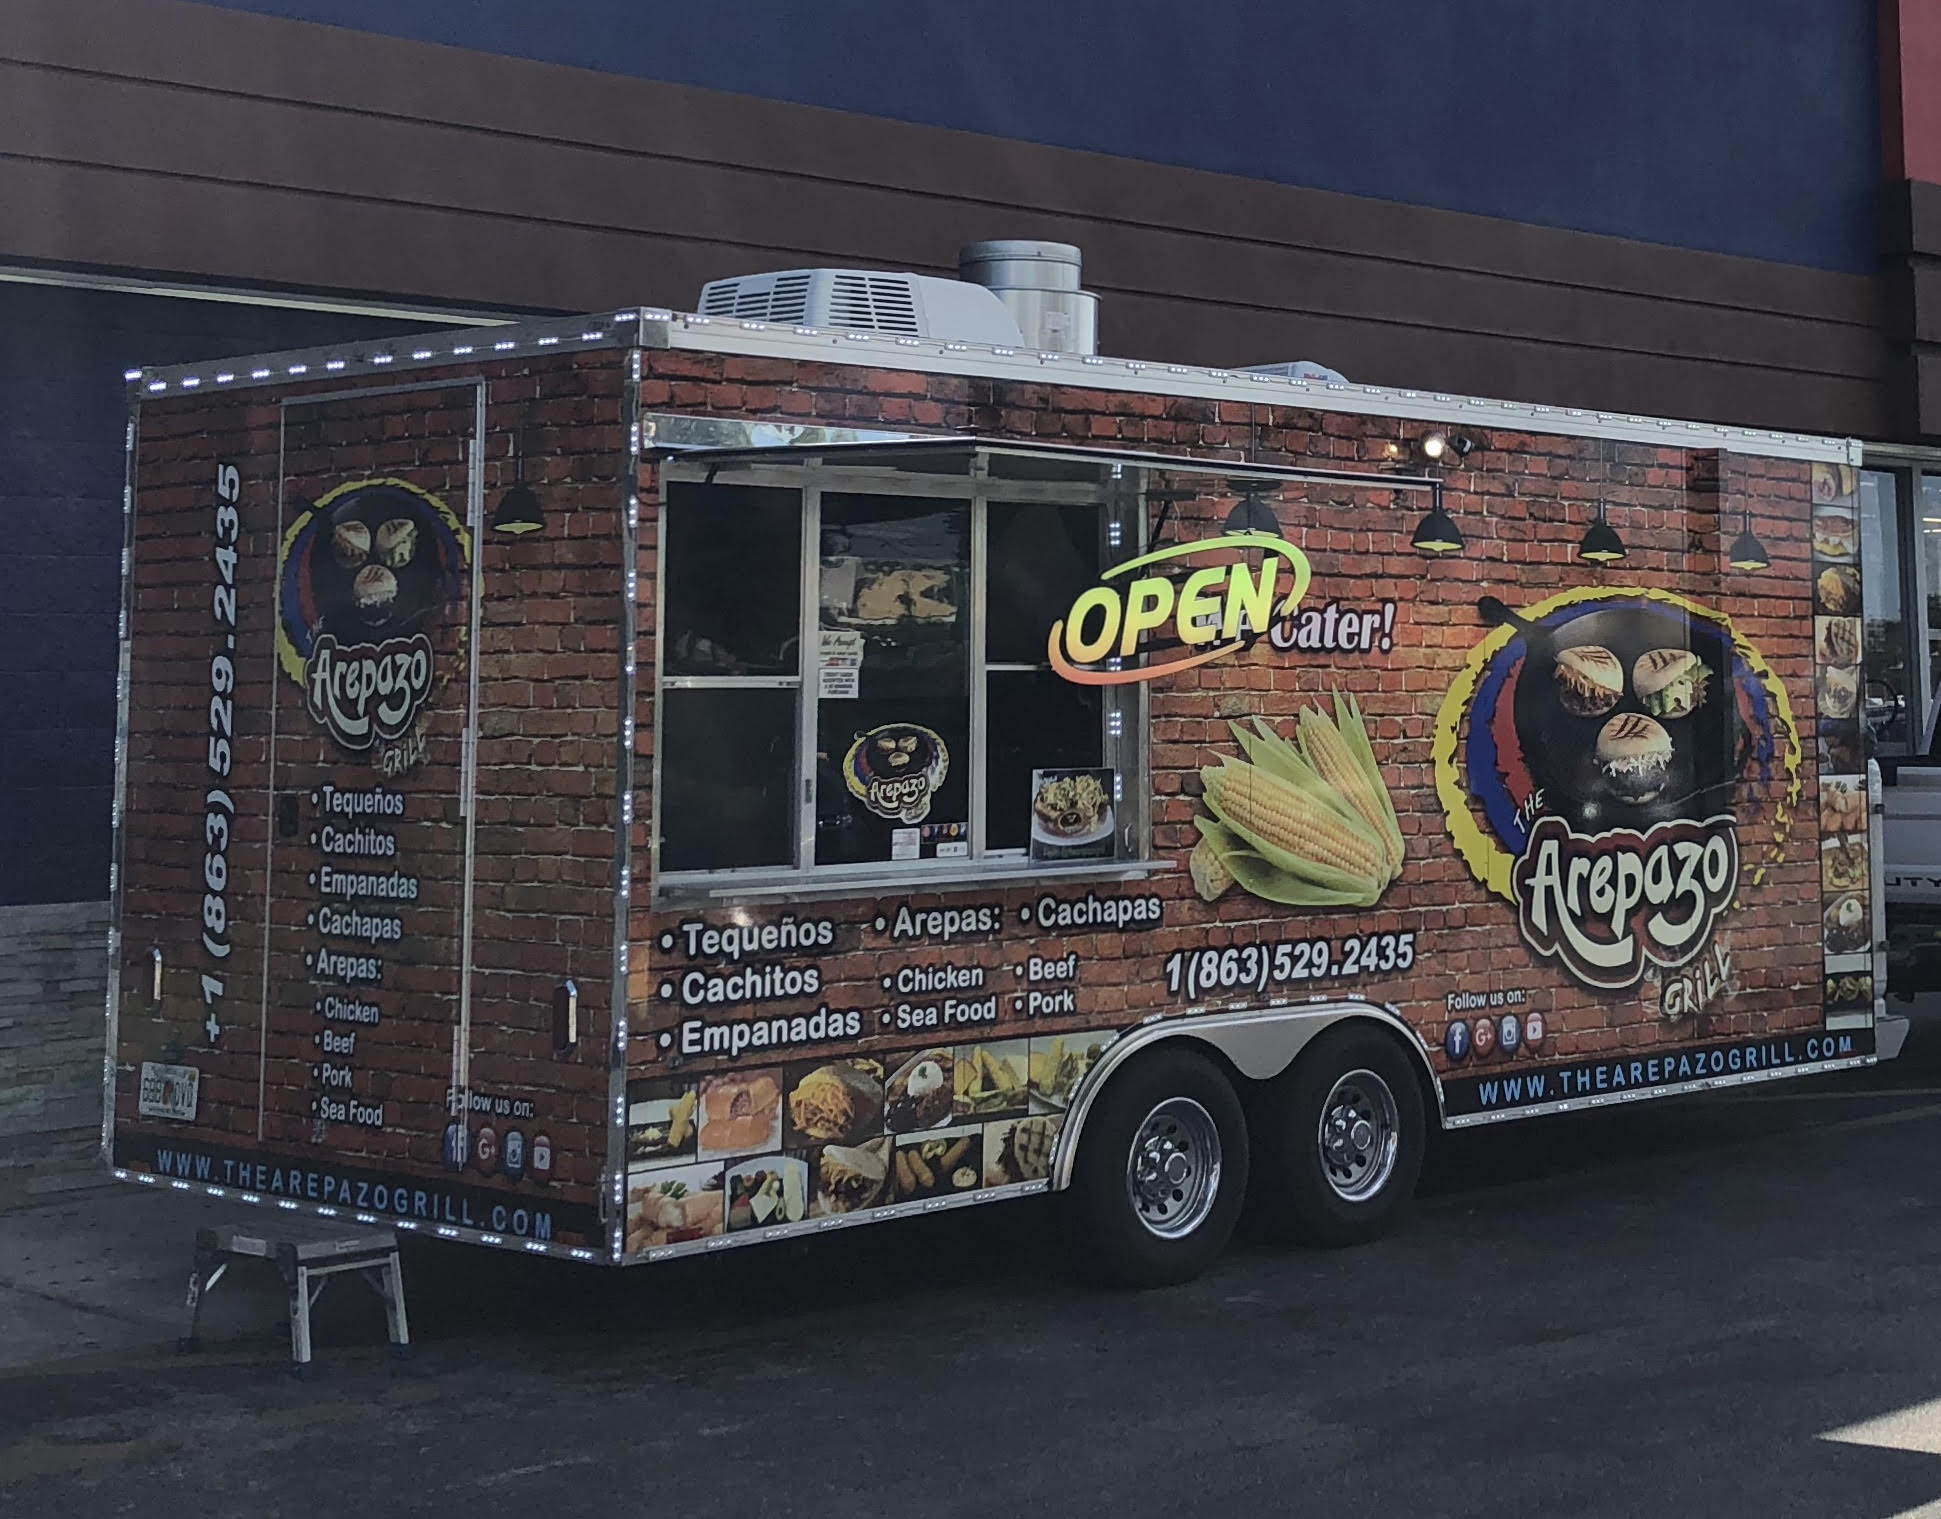 The Arepazo Grill Food Truck